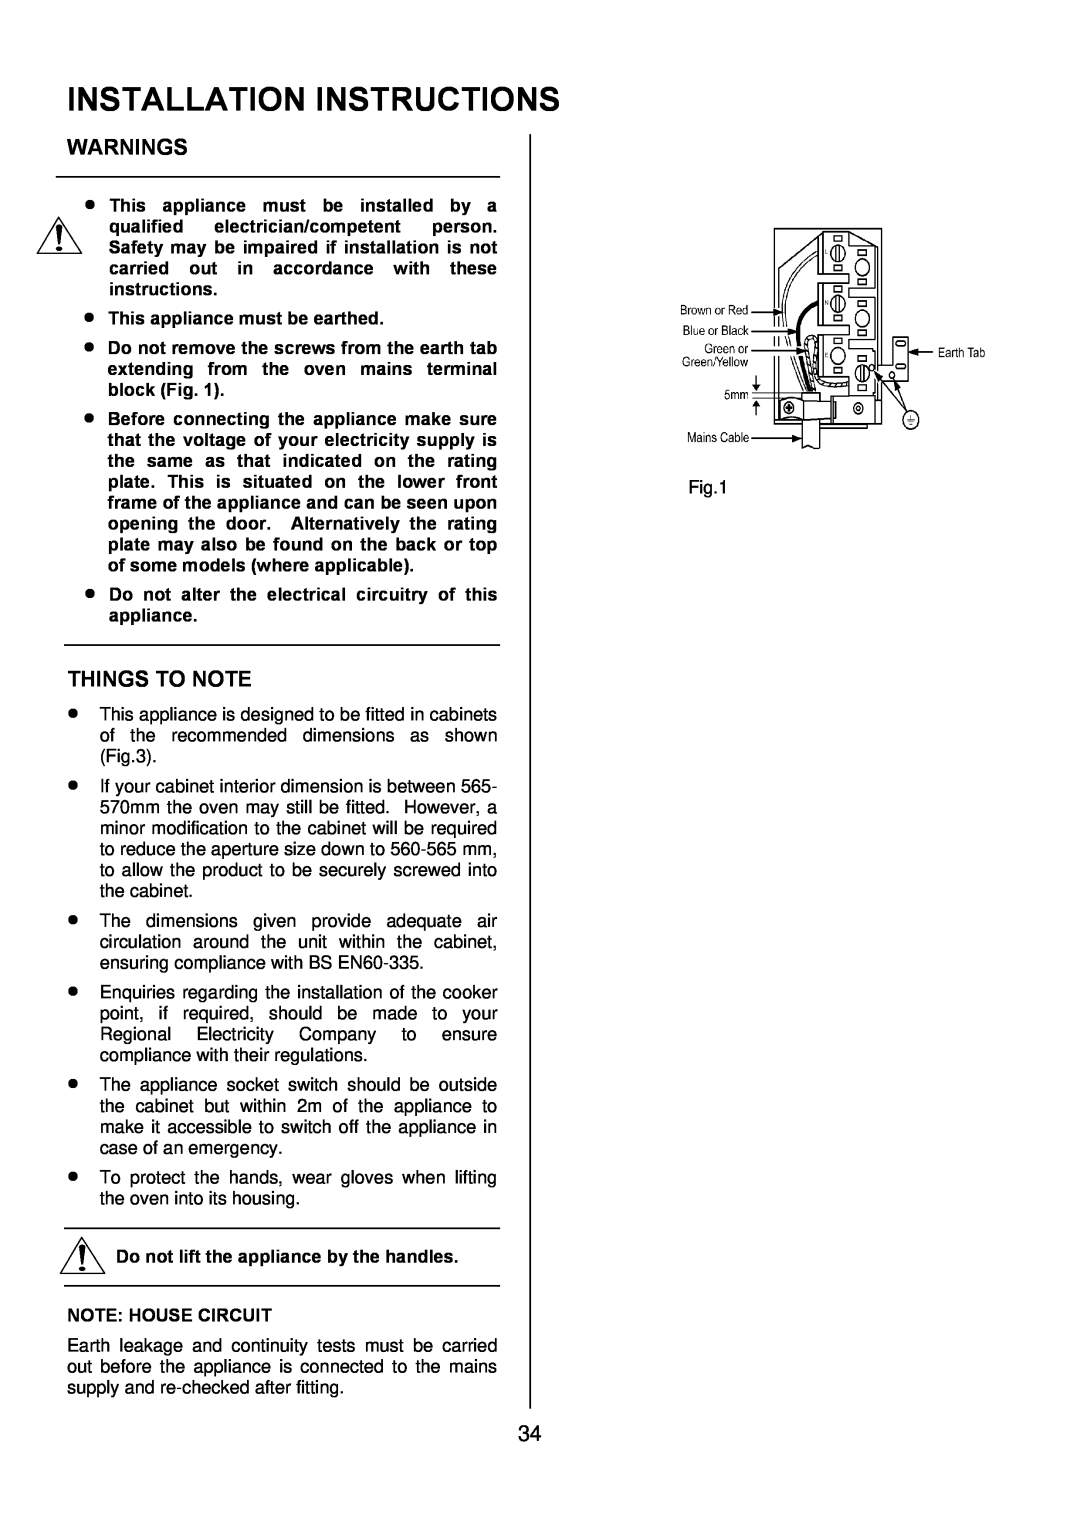 Zanussi ZOD 890 manual Installation Instructions, Warnings, This appliance must be earthed, Things To Note 